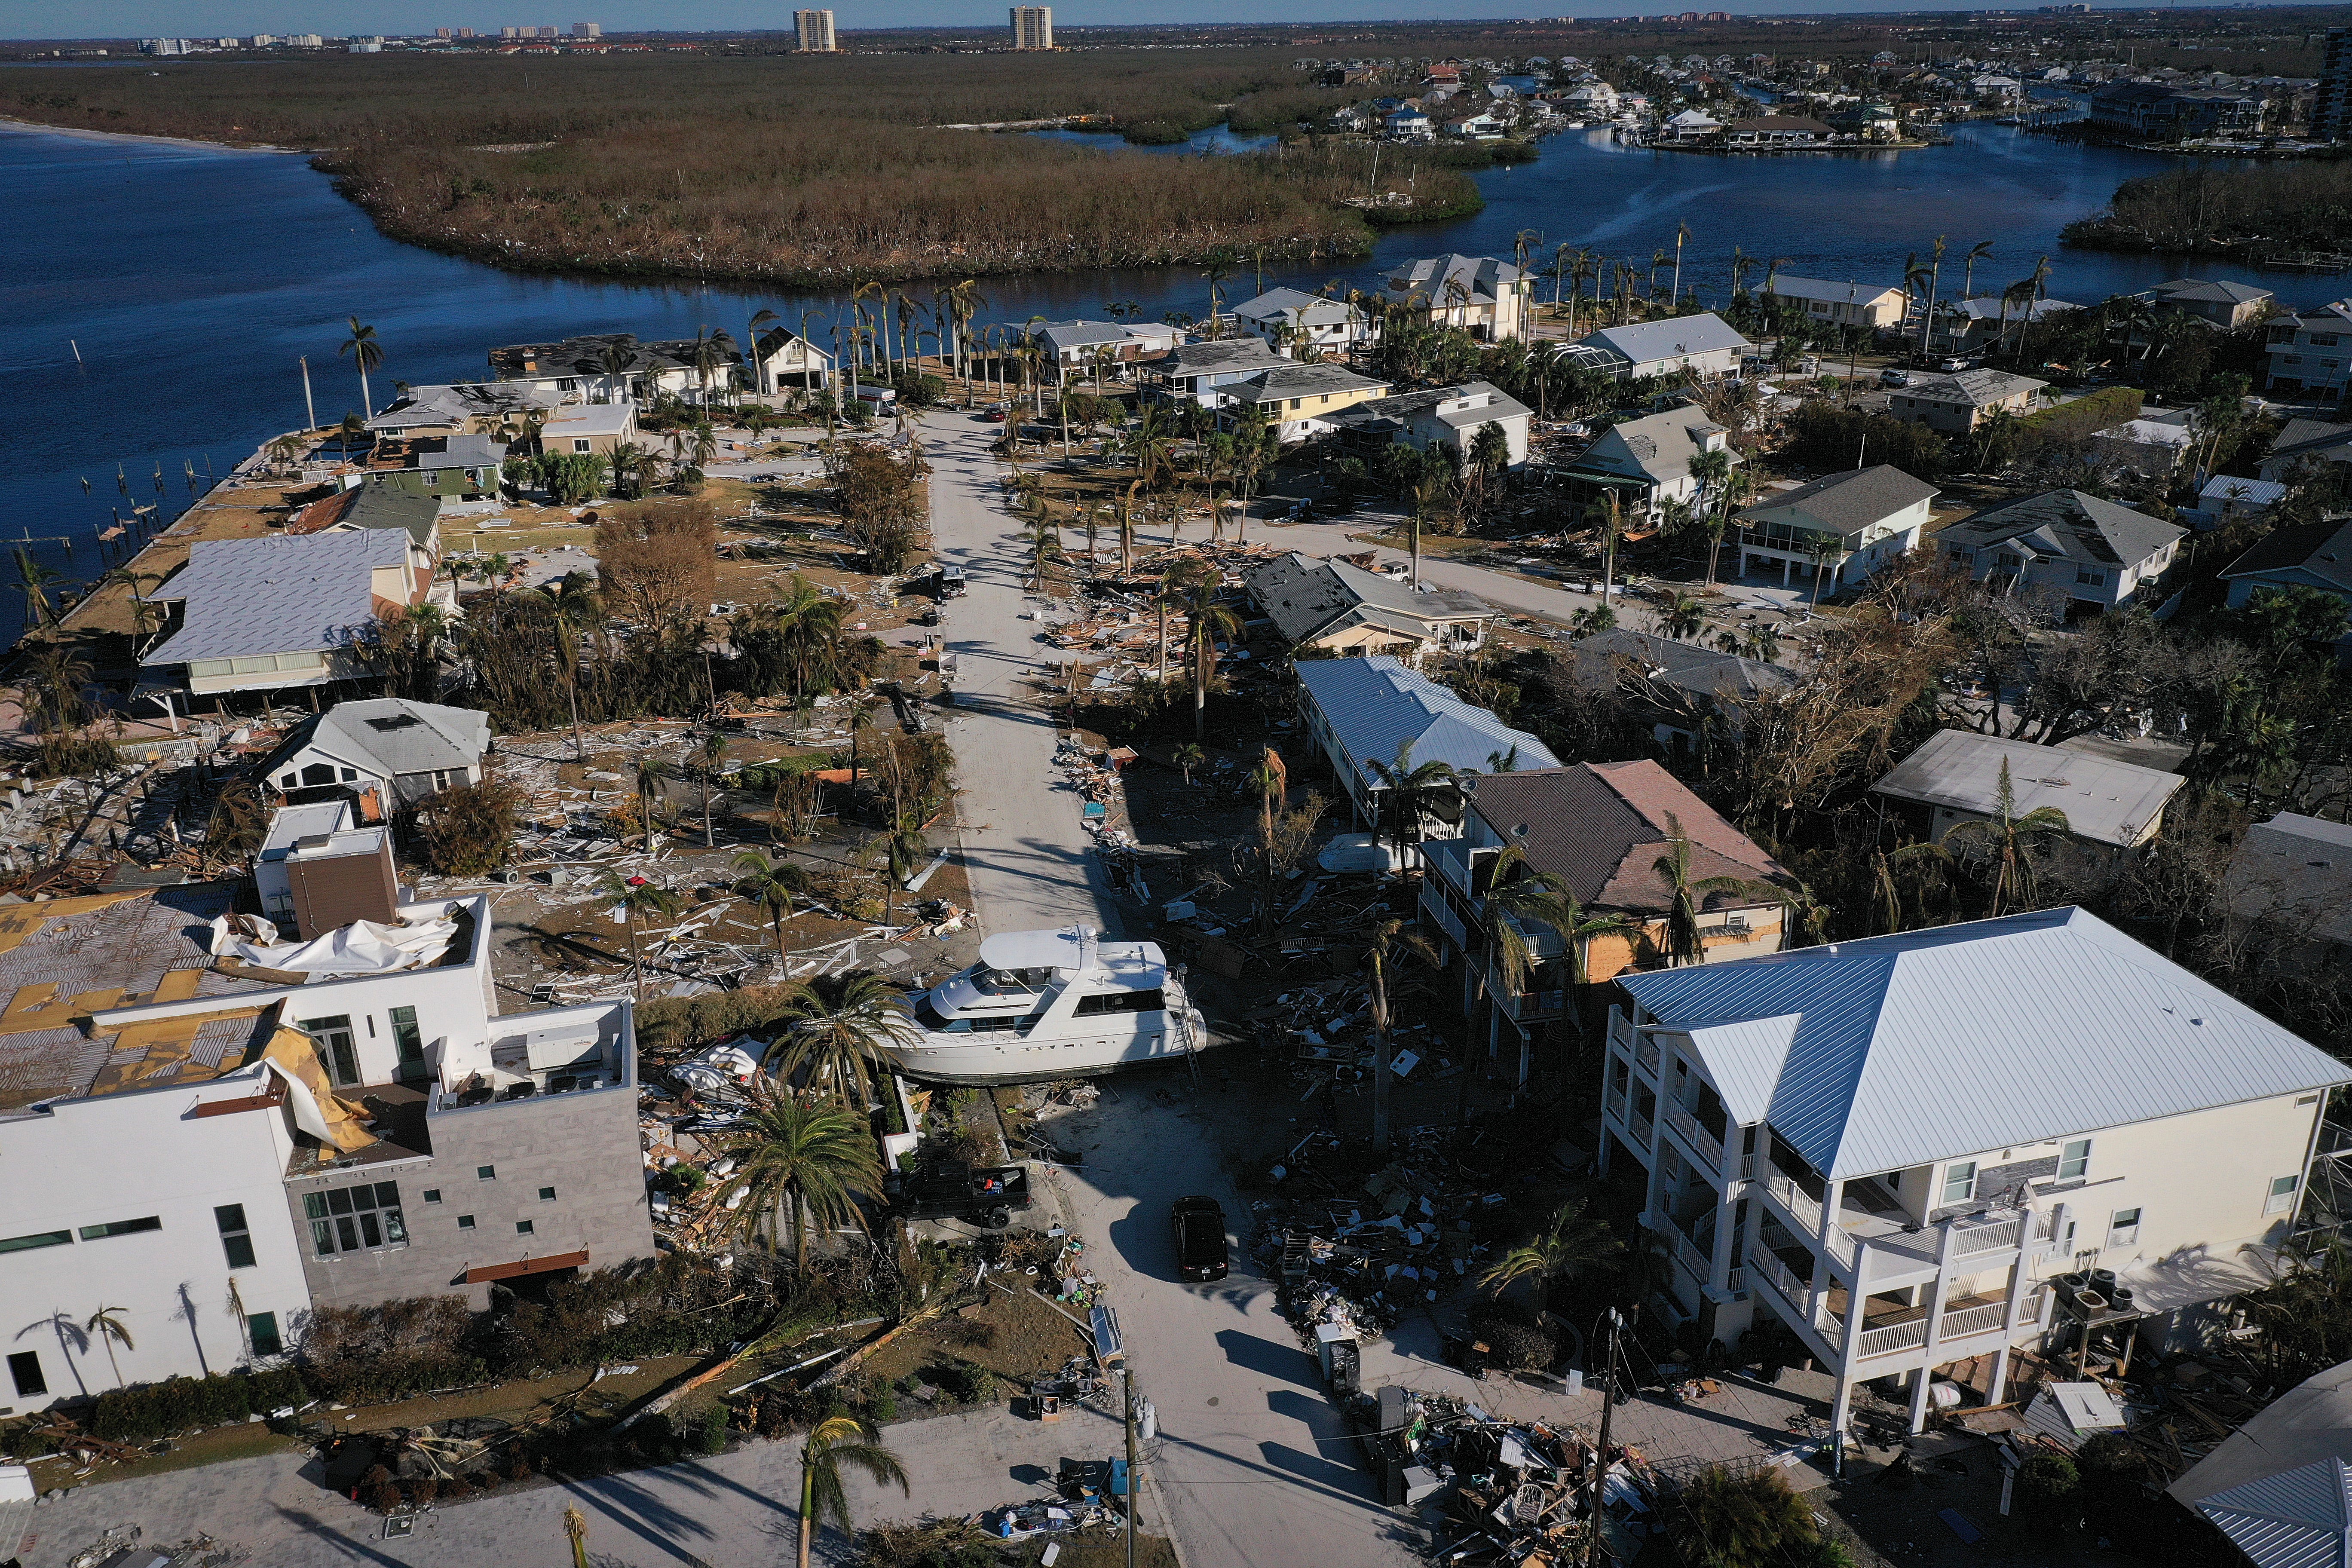 New video shows just how much was destroyed across Southwest Florida after Hurricane Ian